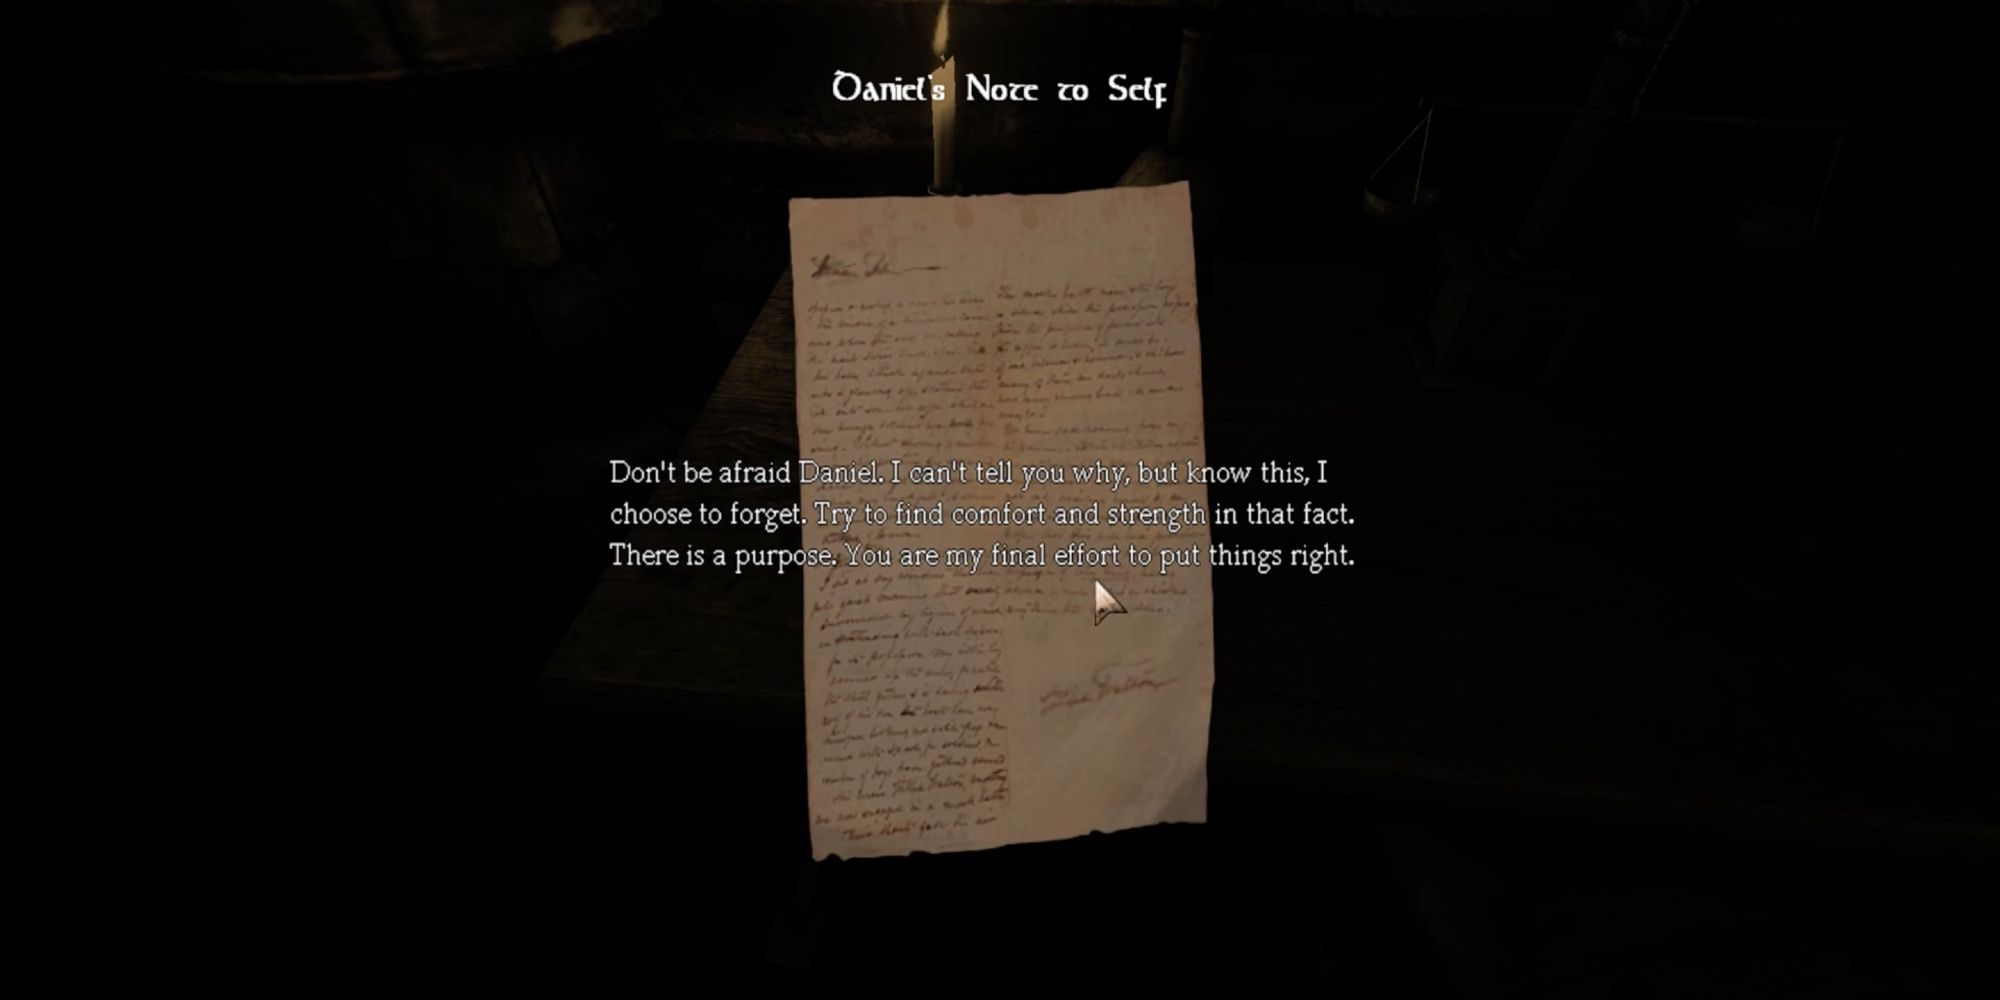 Player reminds himself of his purpose through his writings